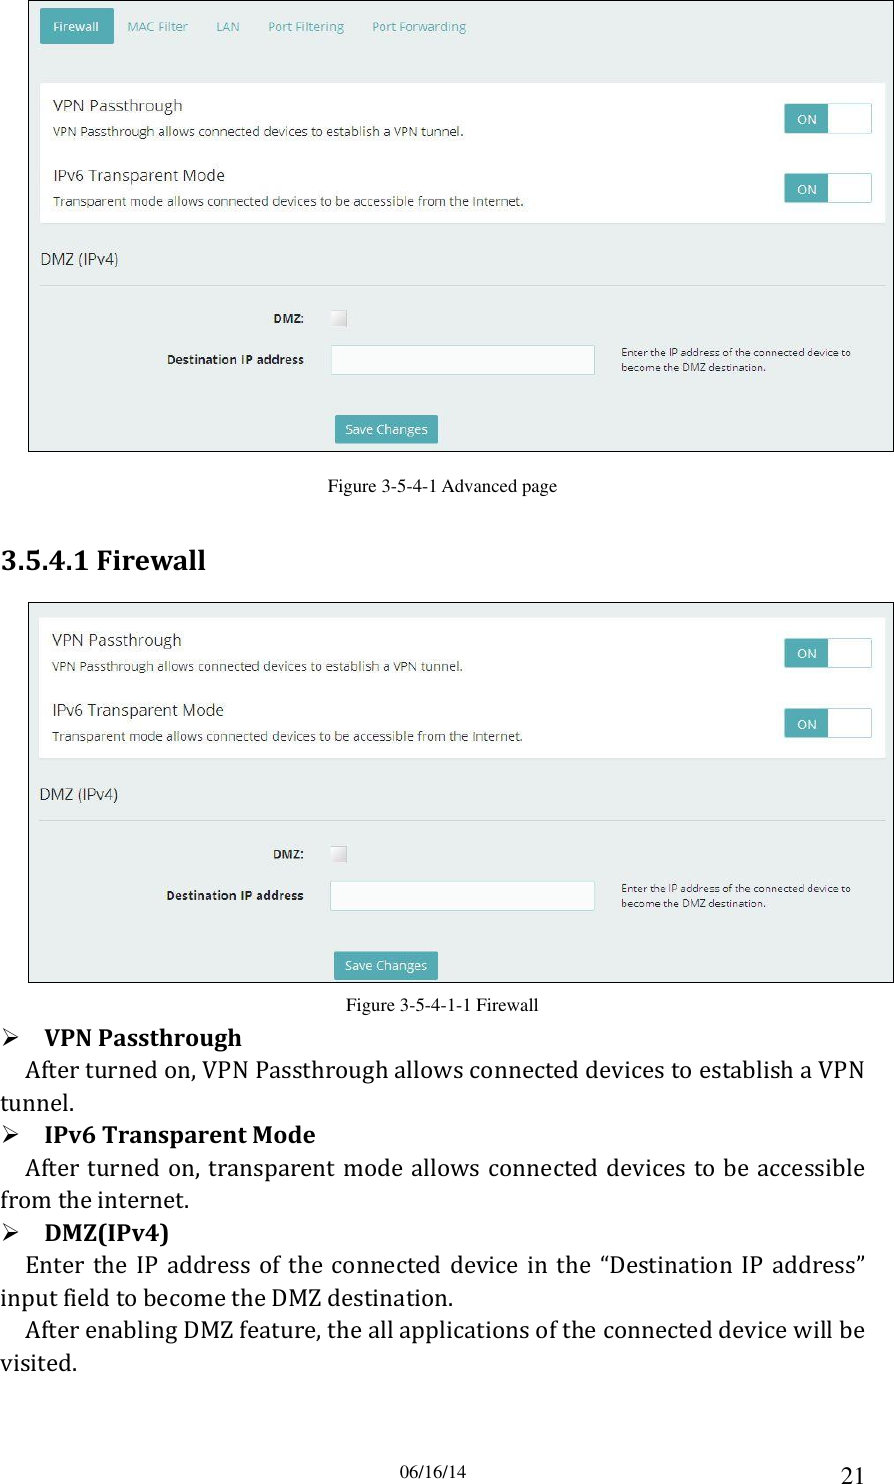 06/16/14 21  Figure 3-5-4-1 Advanced page 3.5.4.1 Firewall  Figure 3-5-4-1-1 Firewall  VPN Passthrough After turned on, VPN Passthrough allows connected devices to establish a VPN tunnel.  IPv6 Transparent Mode After turned on, transparent mode allows connected  devices to be accessible from the internet.  DMZ(IPv4) Enter  the  IP  address  of  the  connected  device in the  “Destination  IP  address” input field to become the DMZ destination. After enabling DMZ feature, the all applications of the connected device will be visited. 